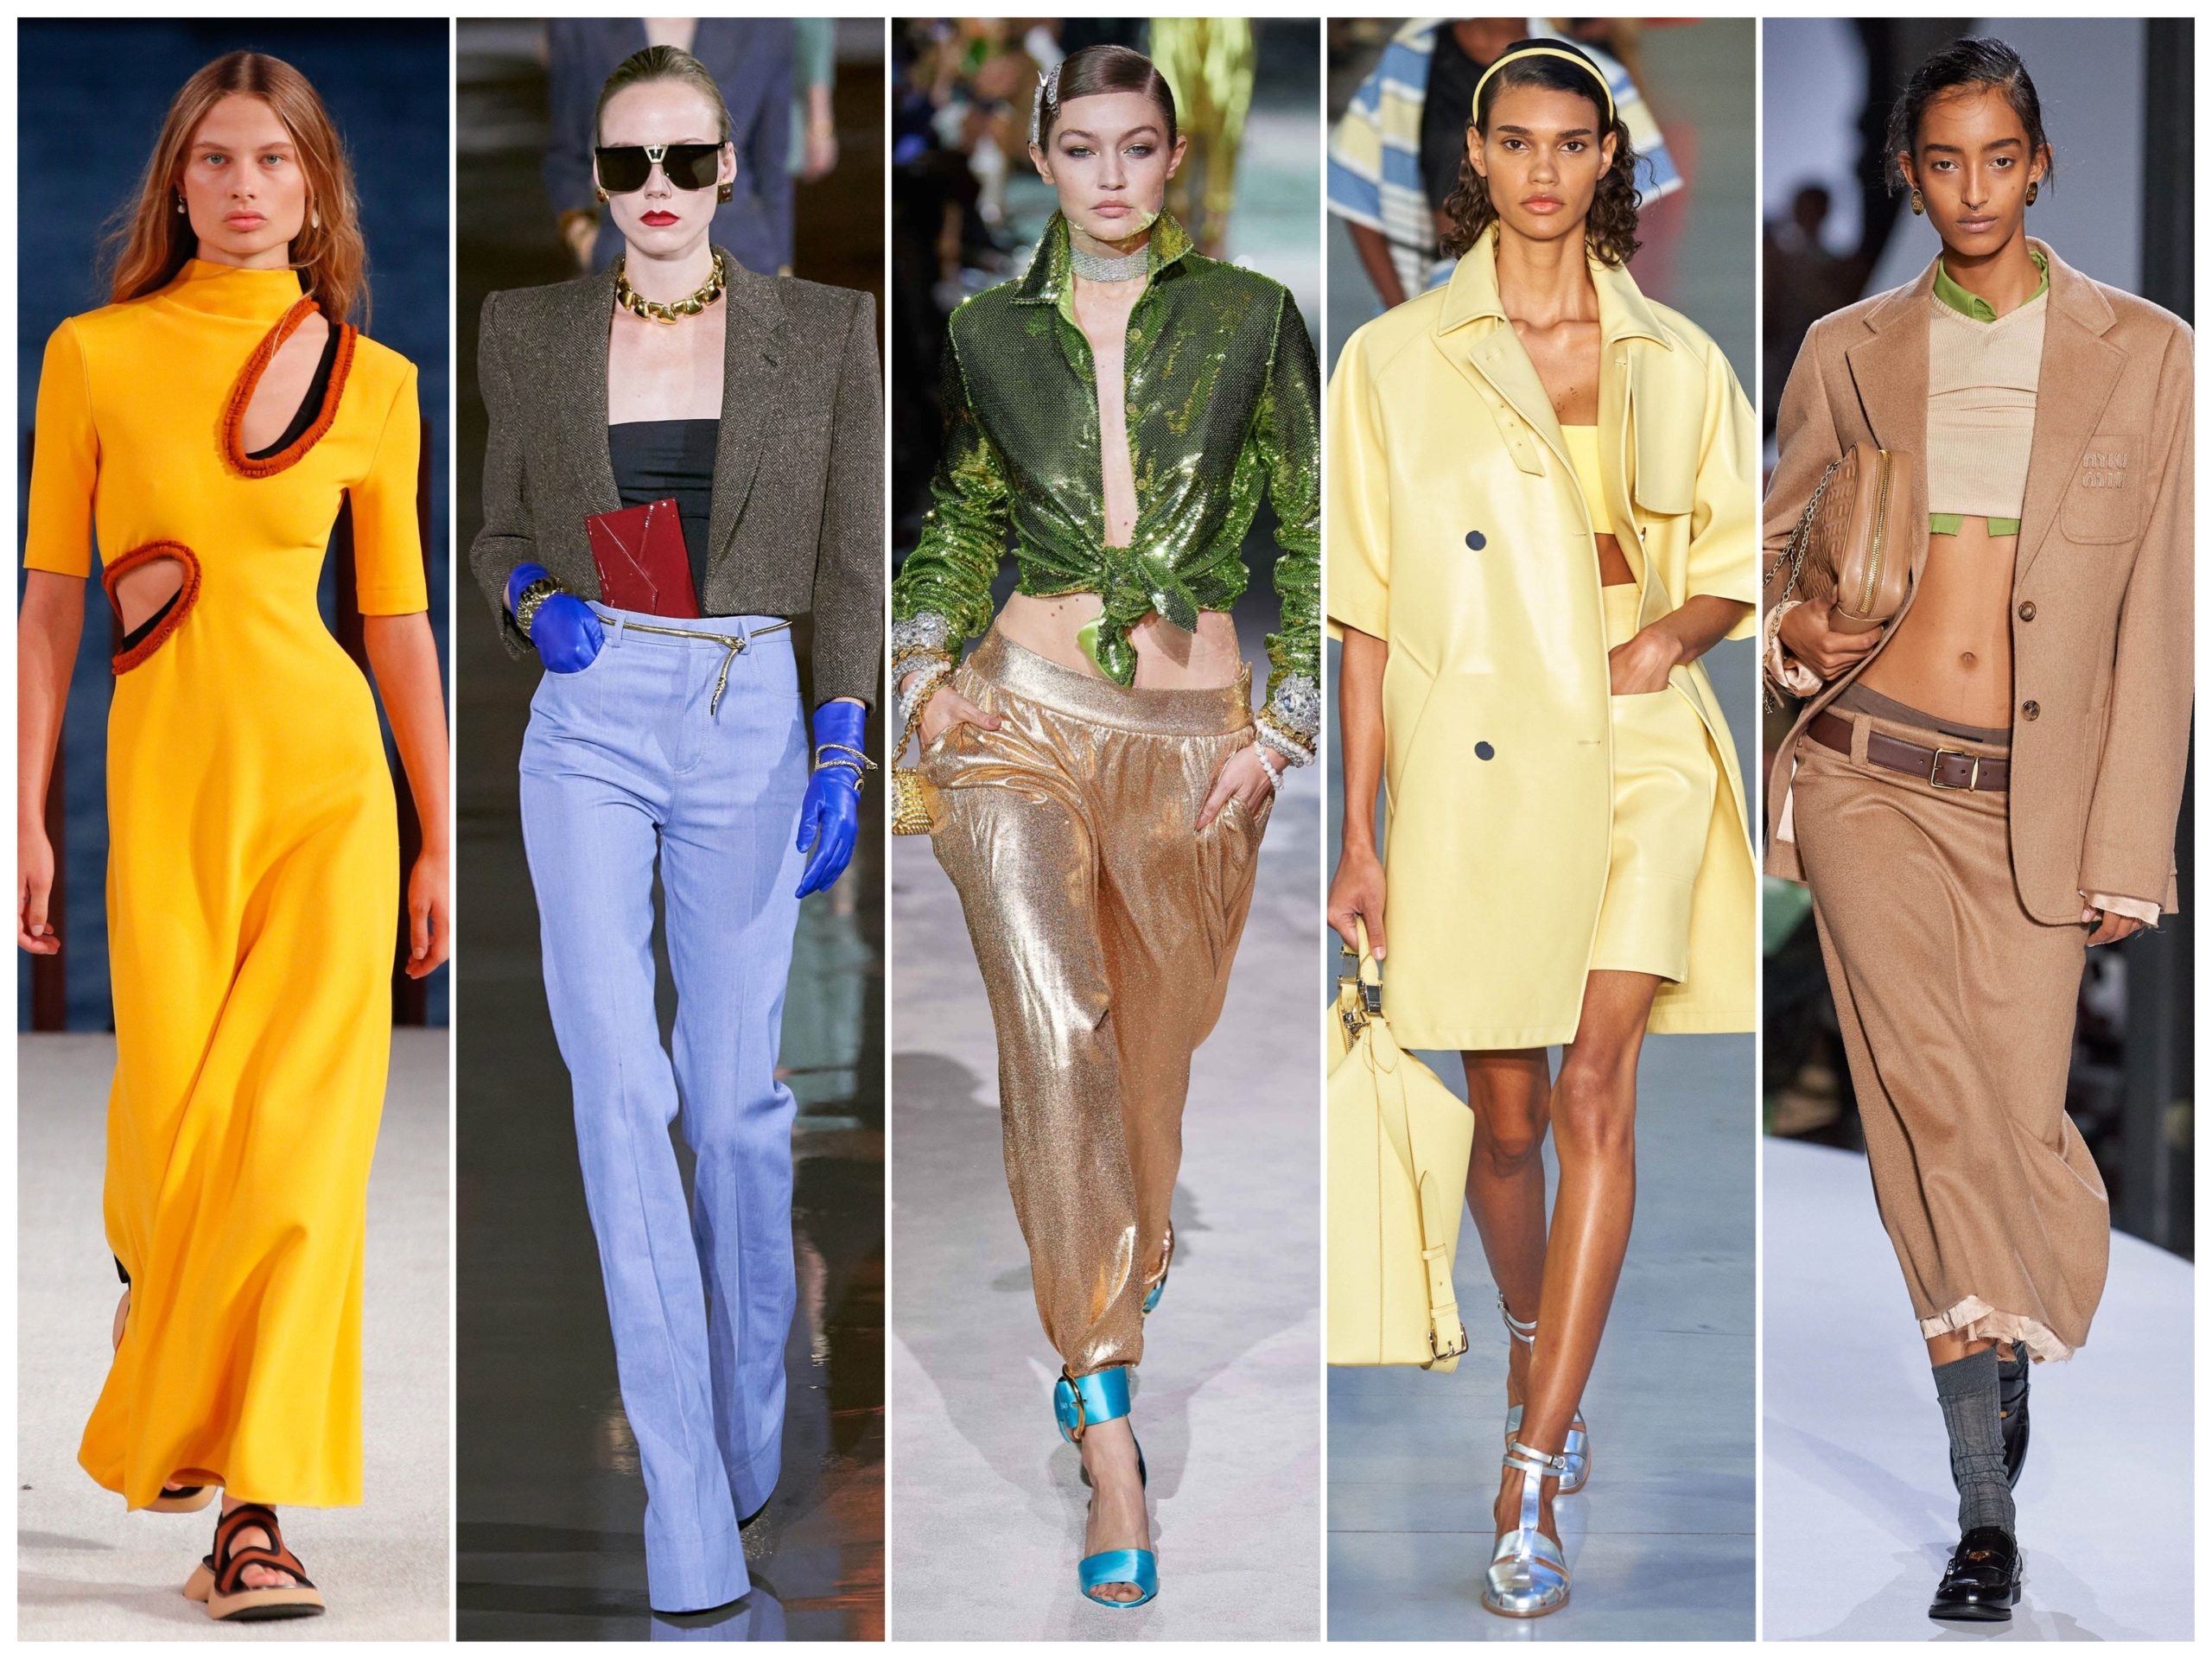 The Top Fashion Trends For Spring-Summer 2022